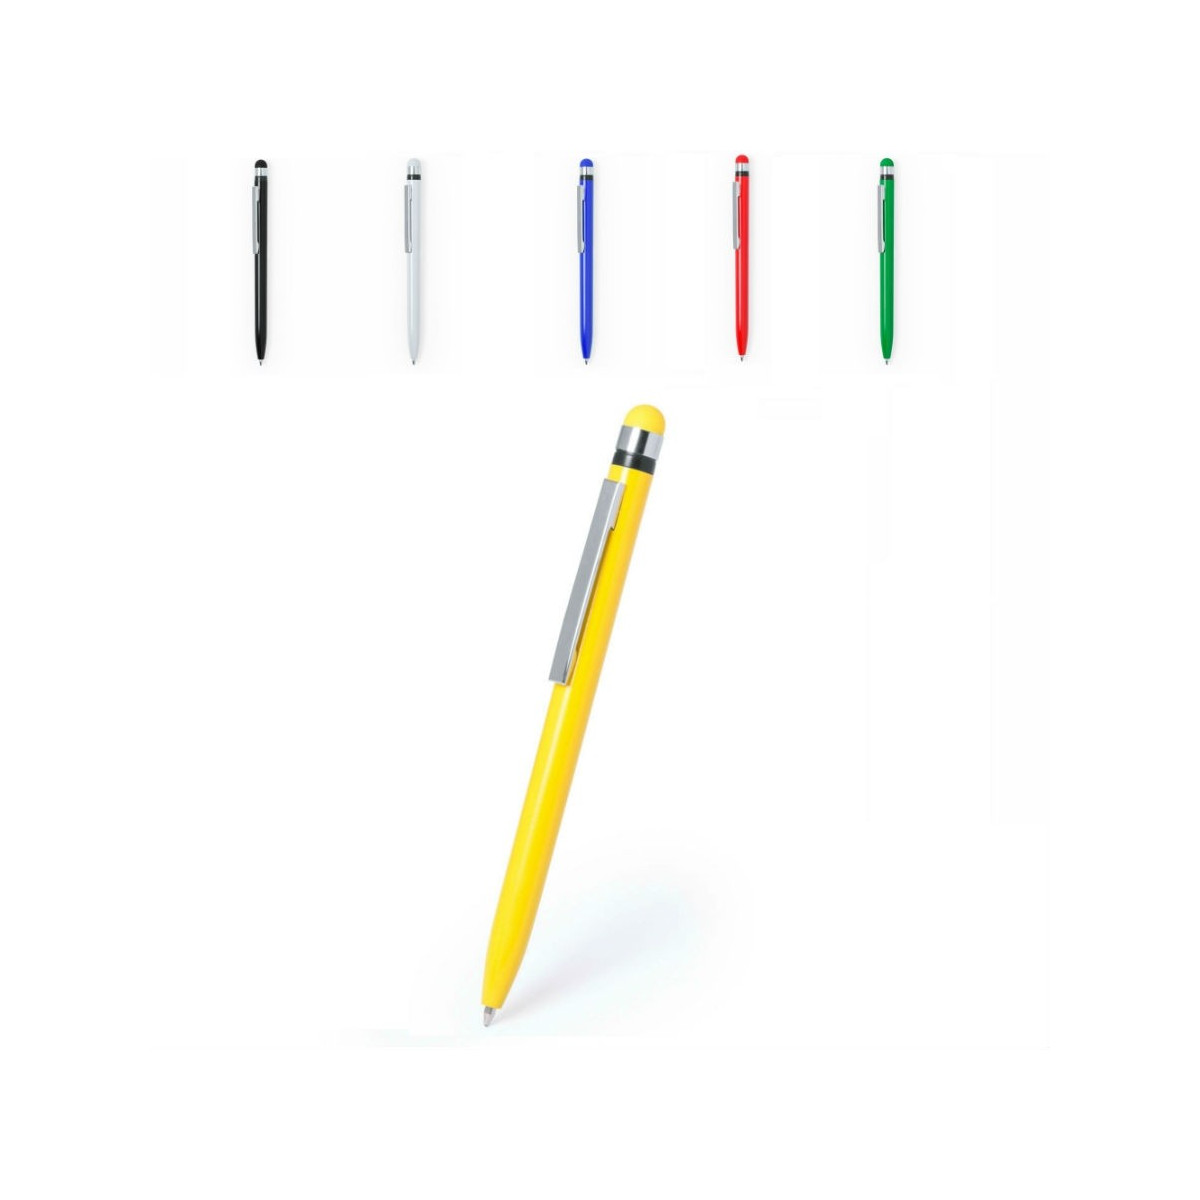 Stylet Pour Tablette Android